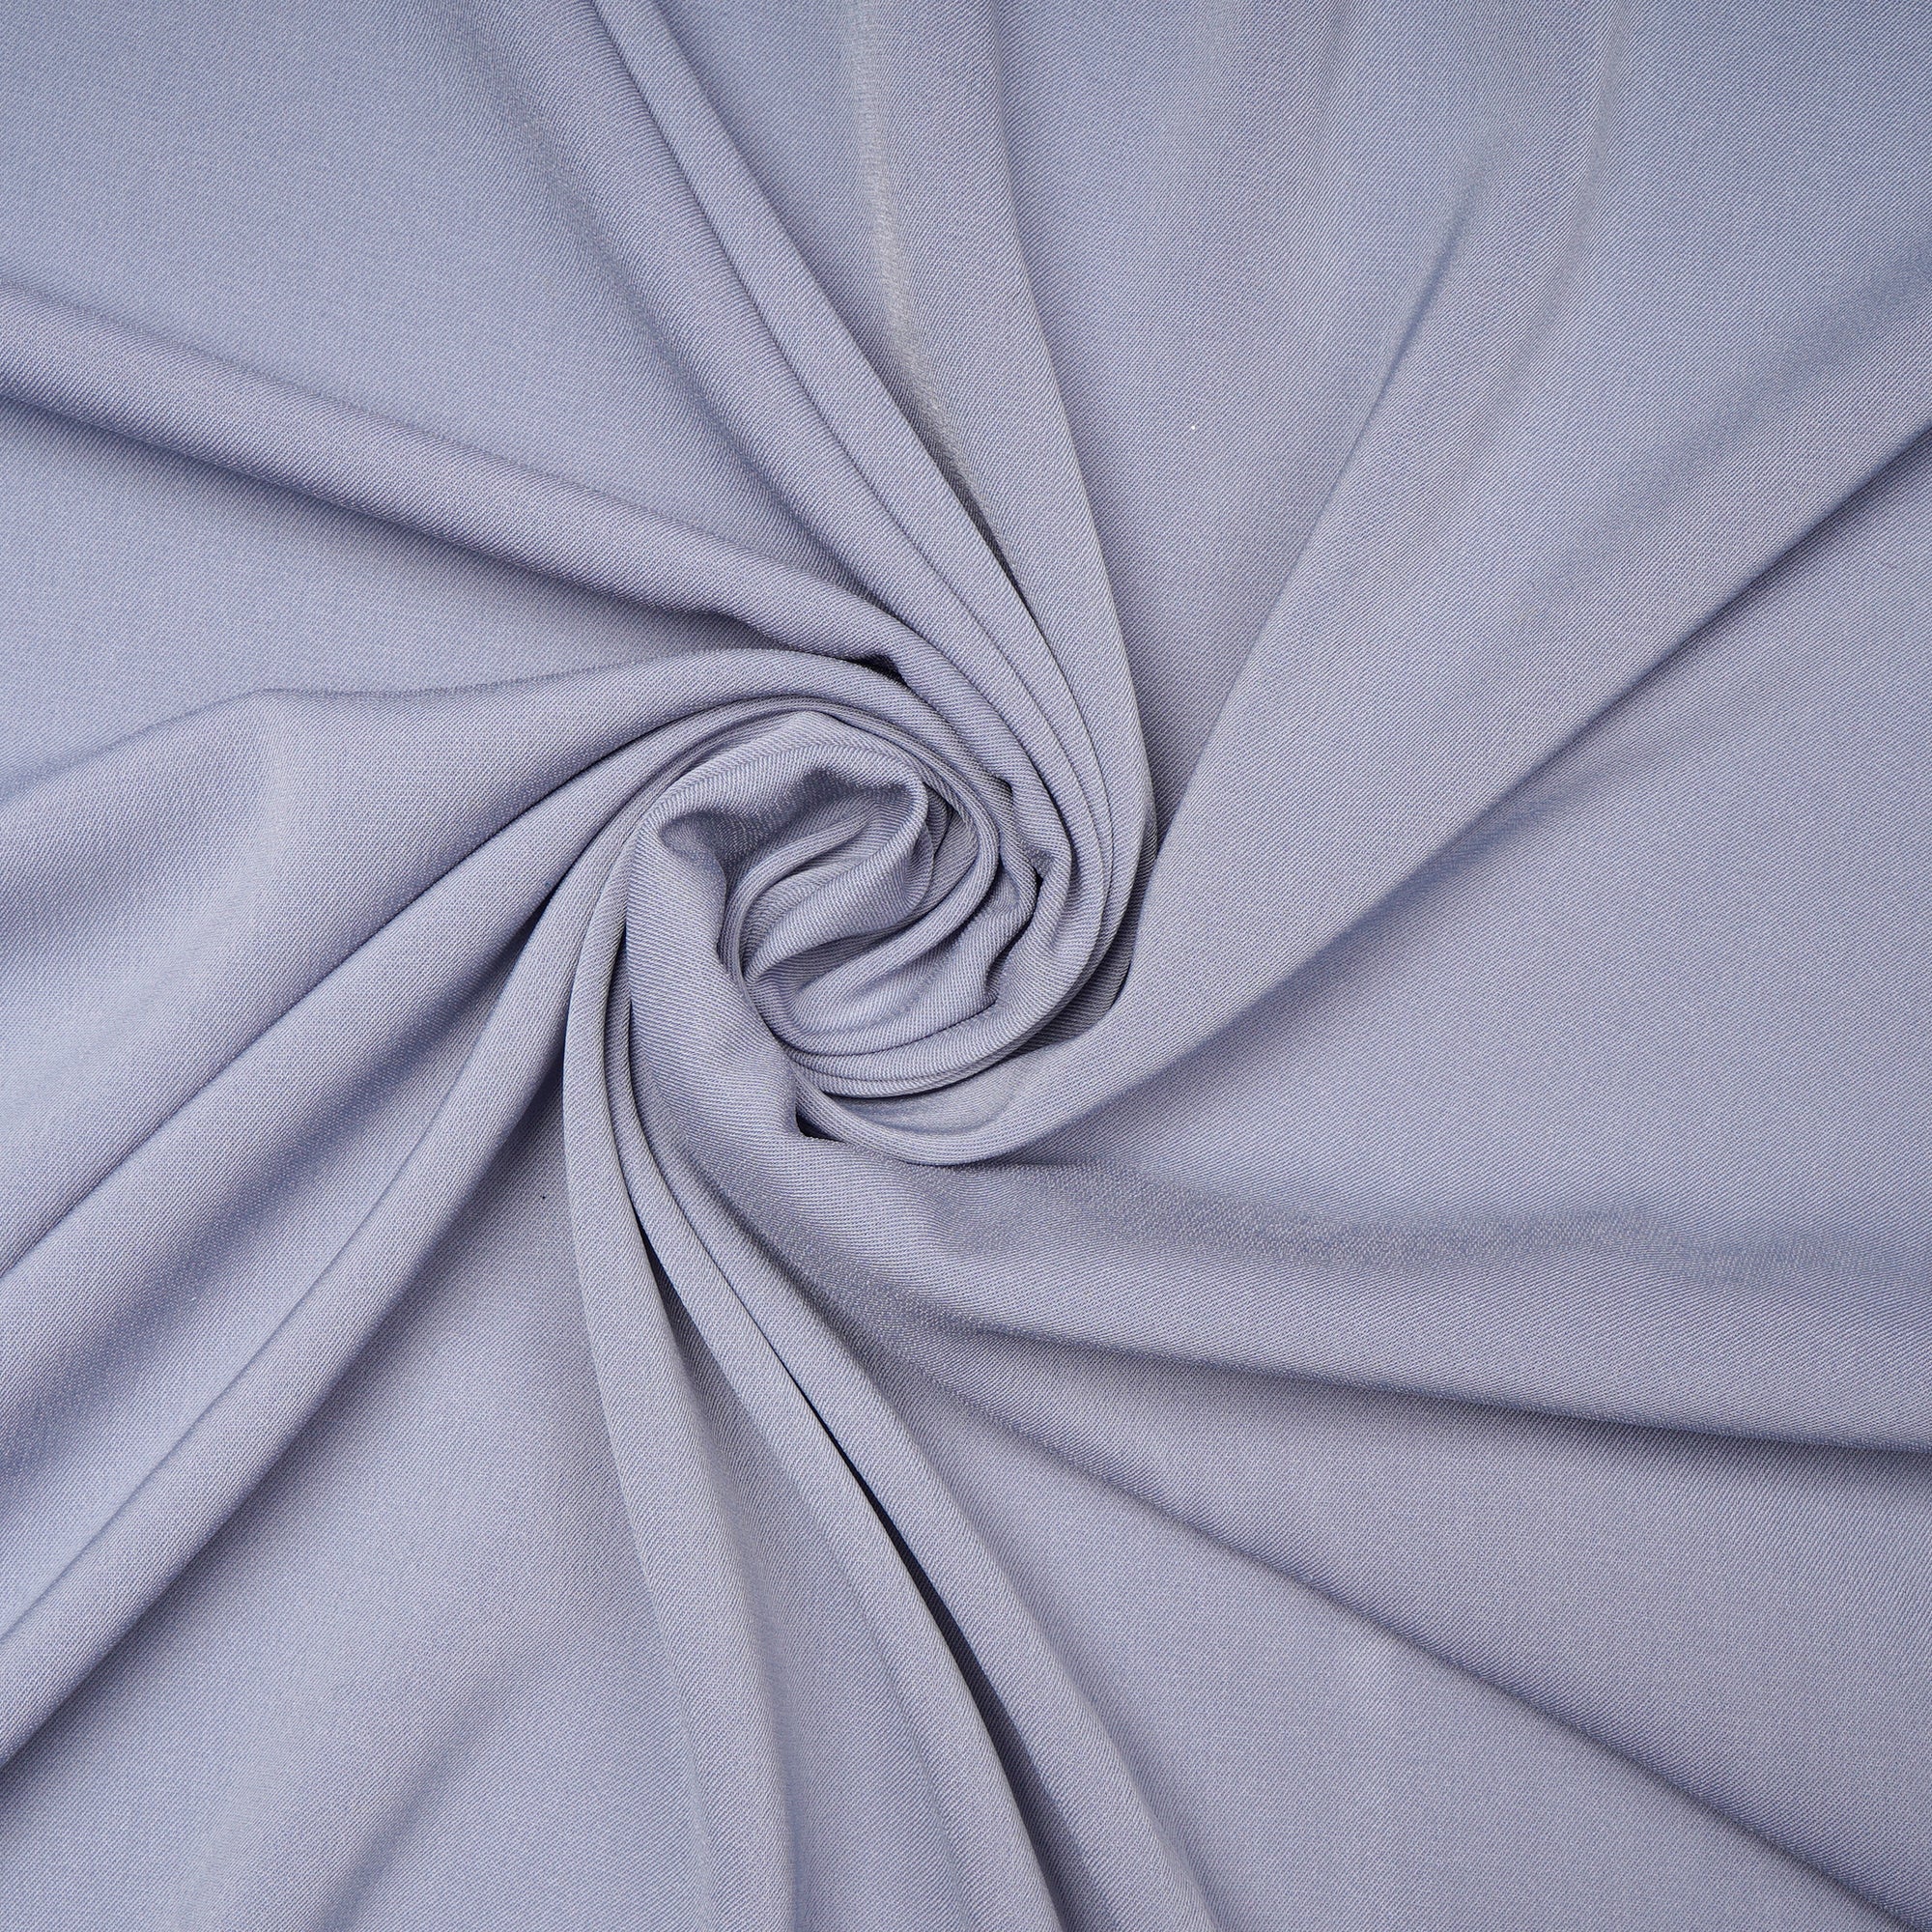 Grey Solid Dyed Imported Prada Crepe Fabric (60" Width)